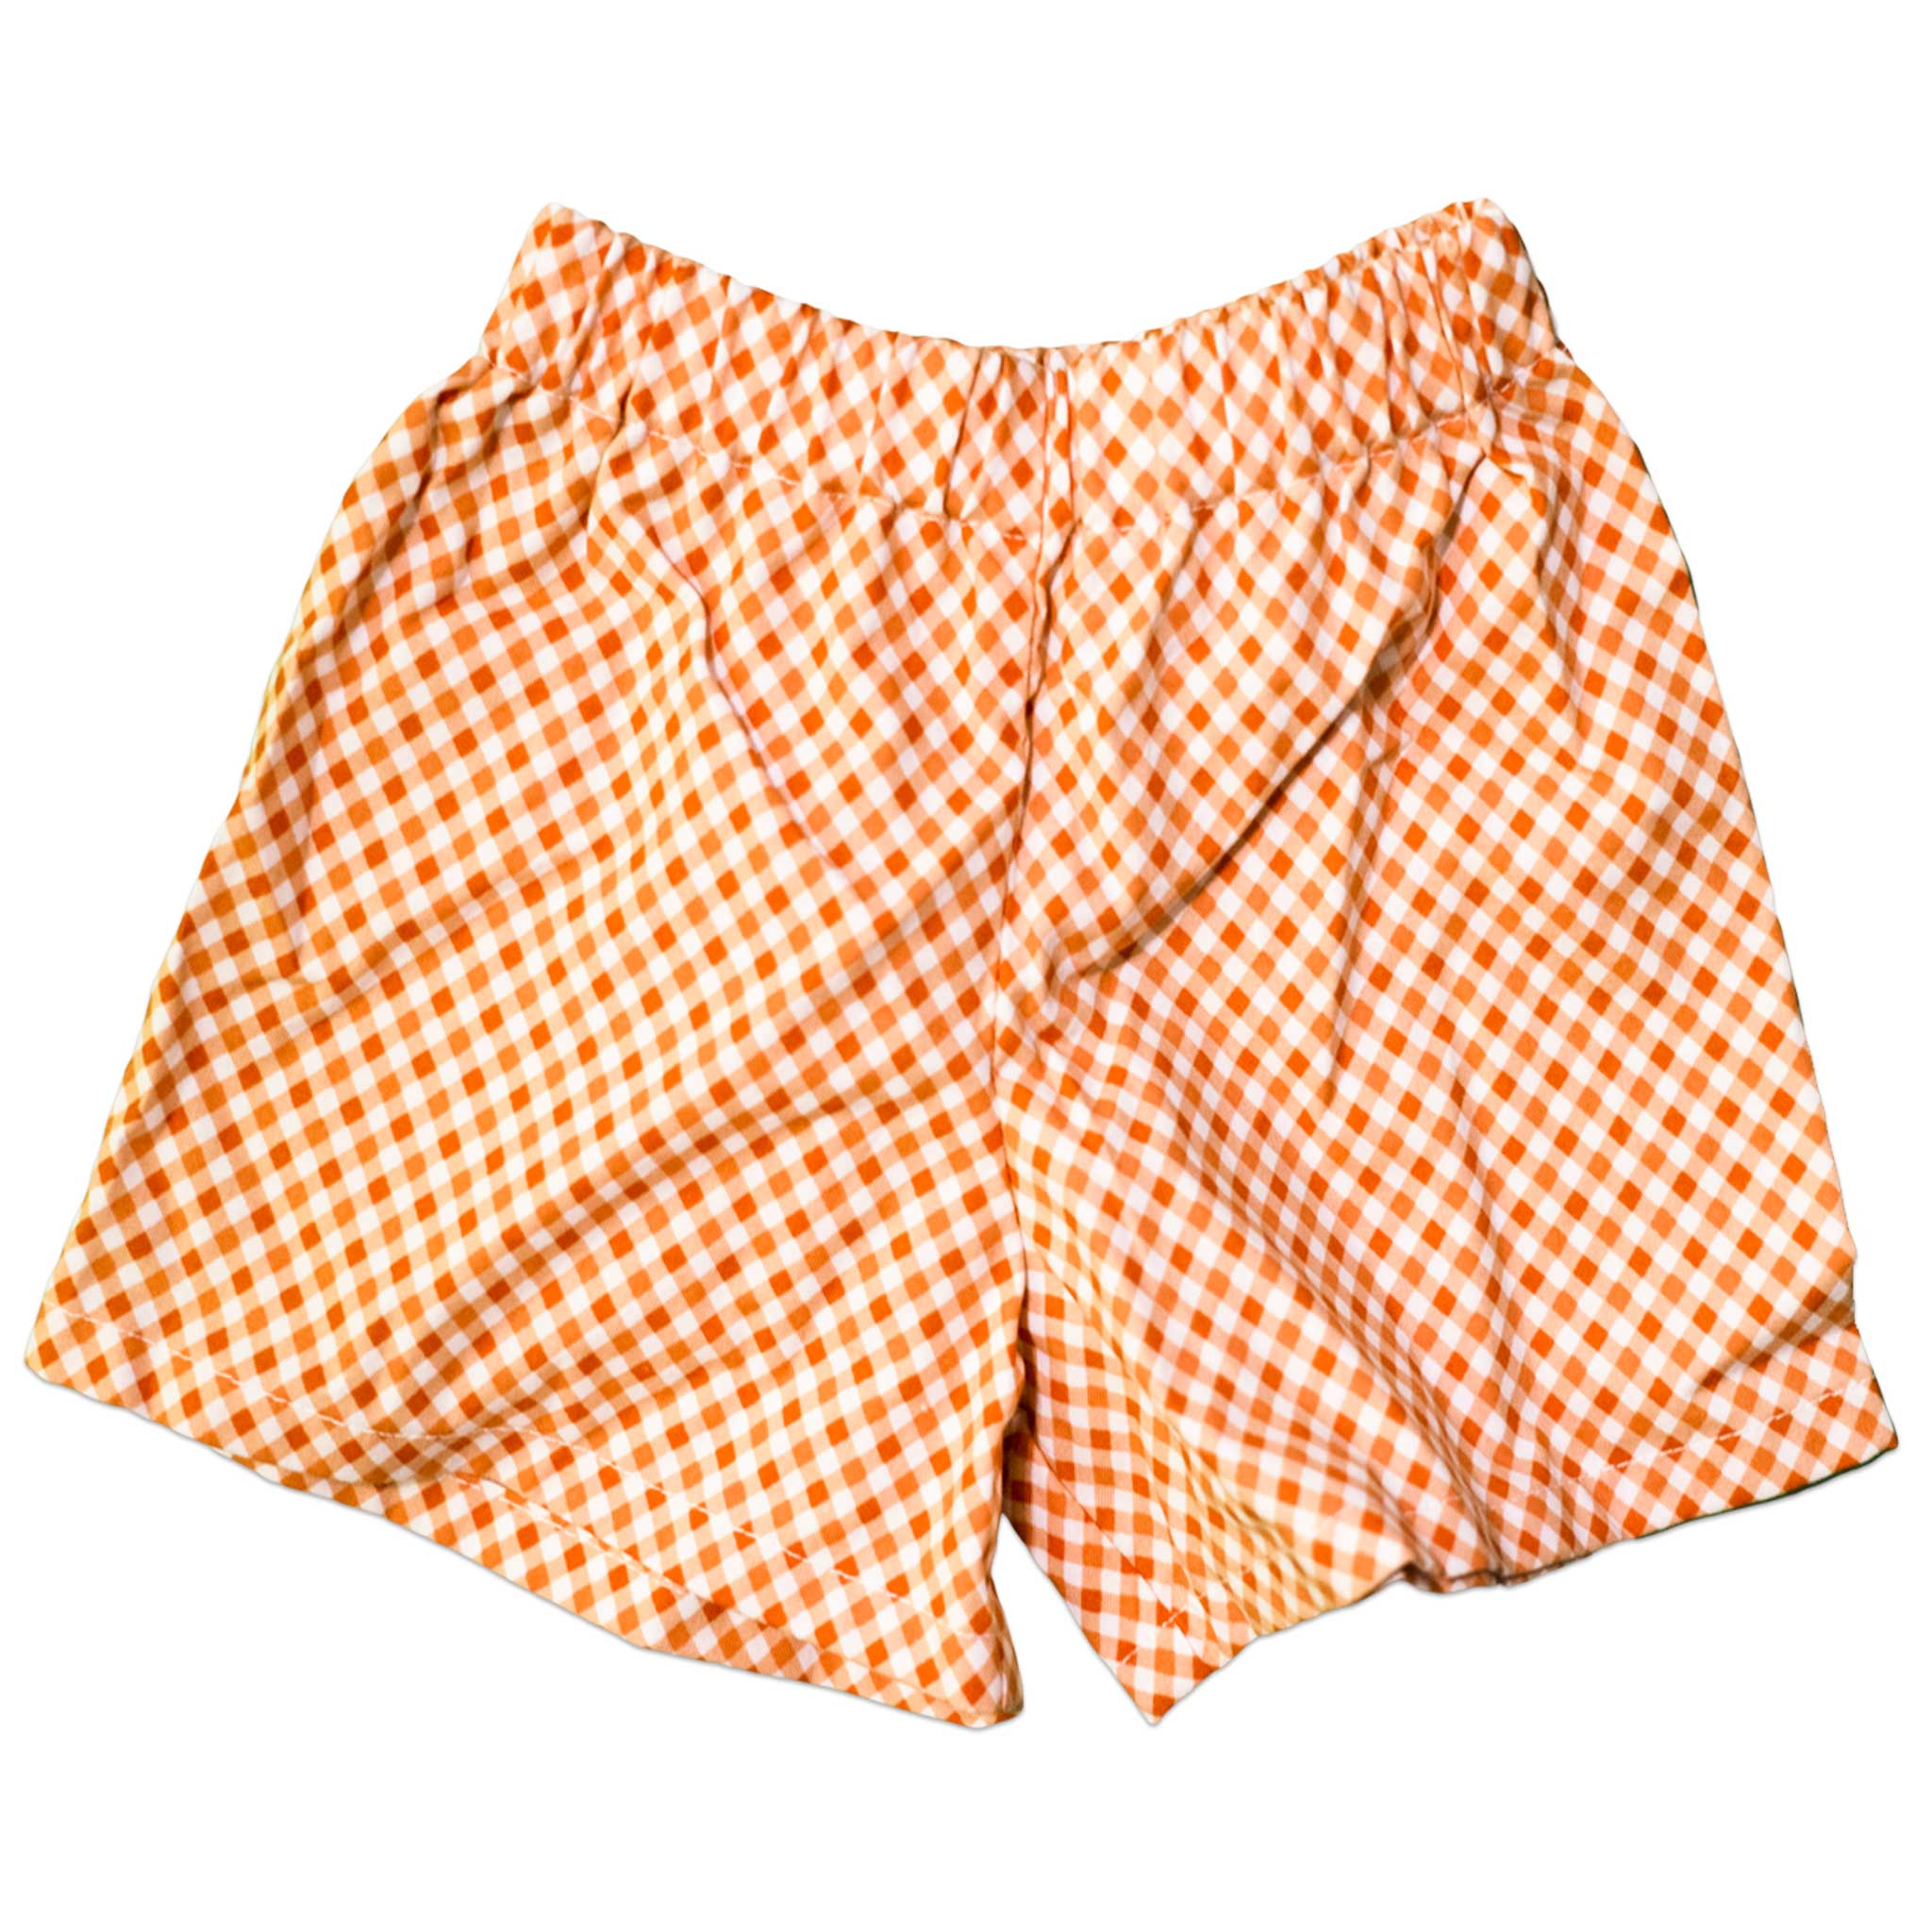 Handmade Carrie Crop Top with Orange Gingham Shorts Outfit - Toddler